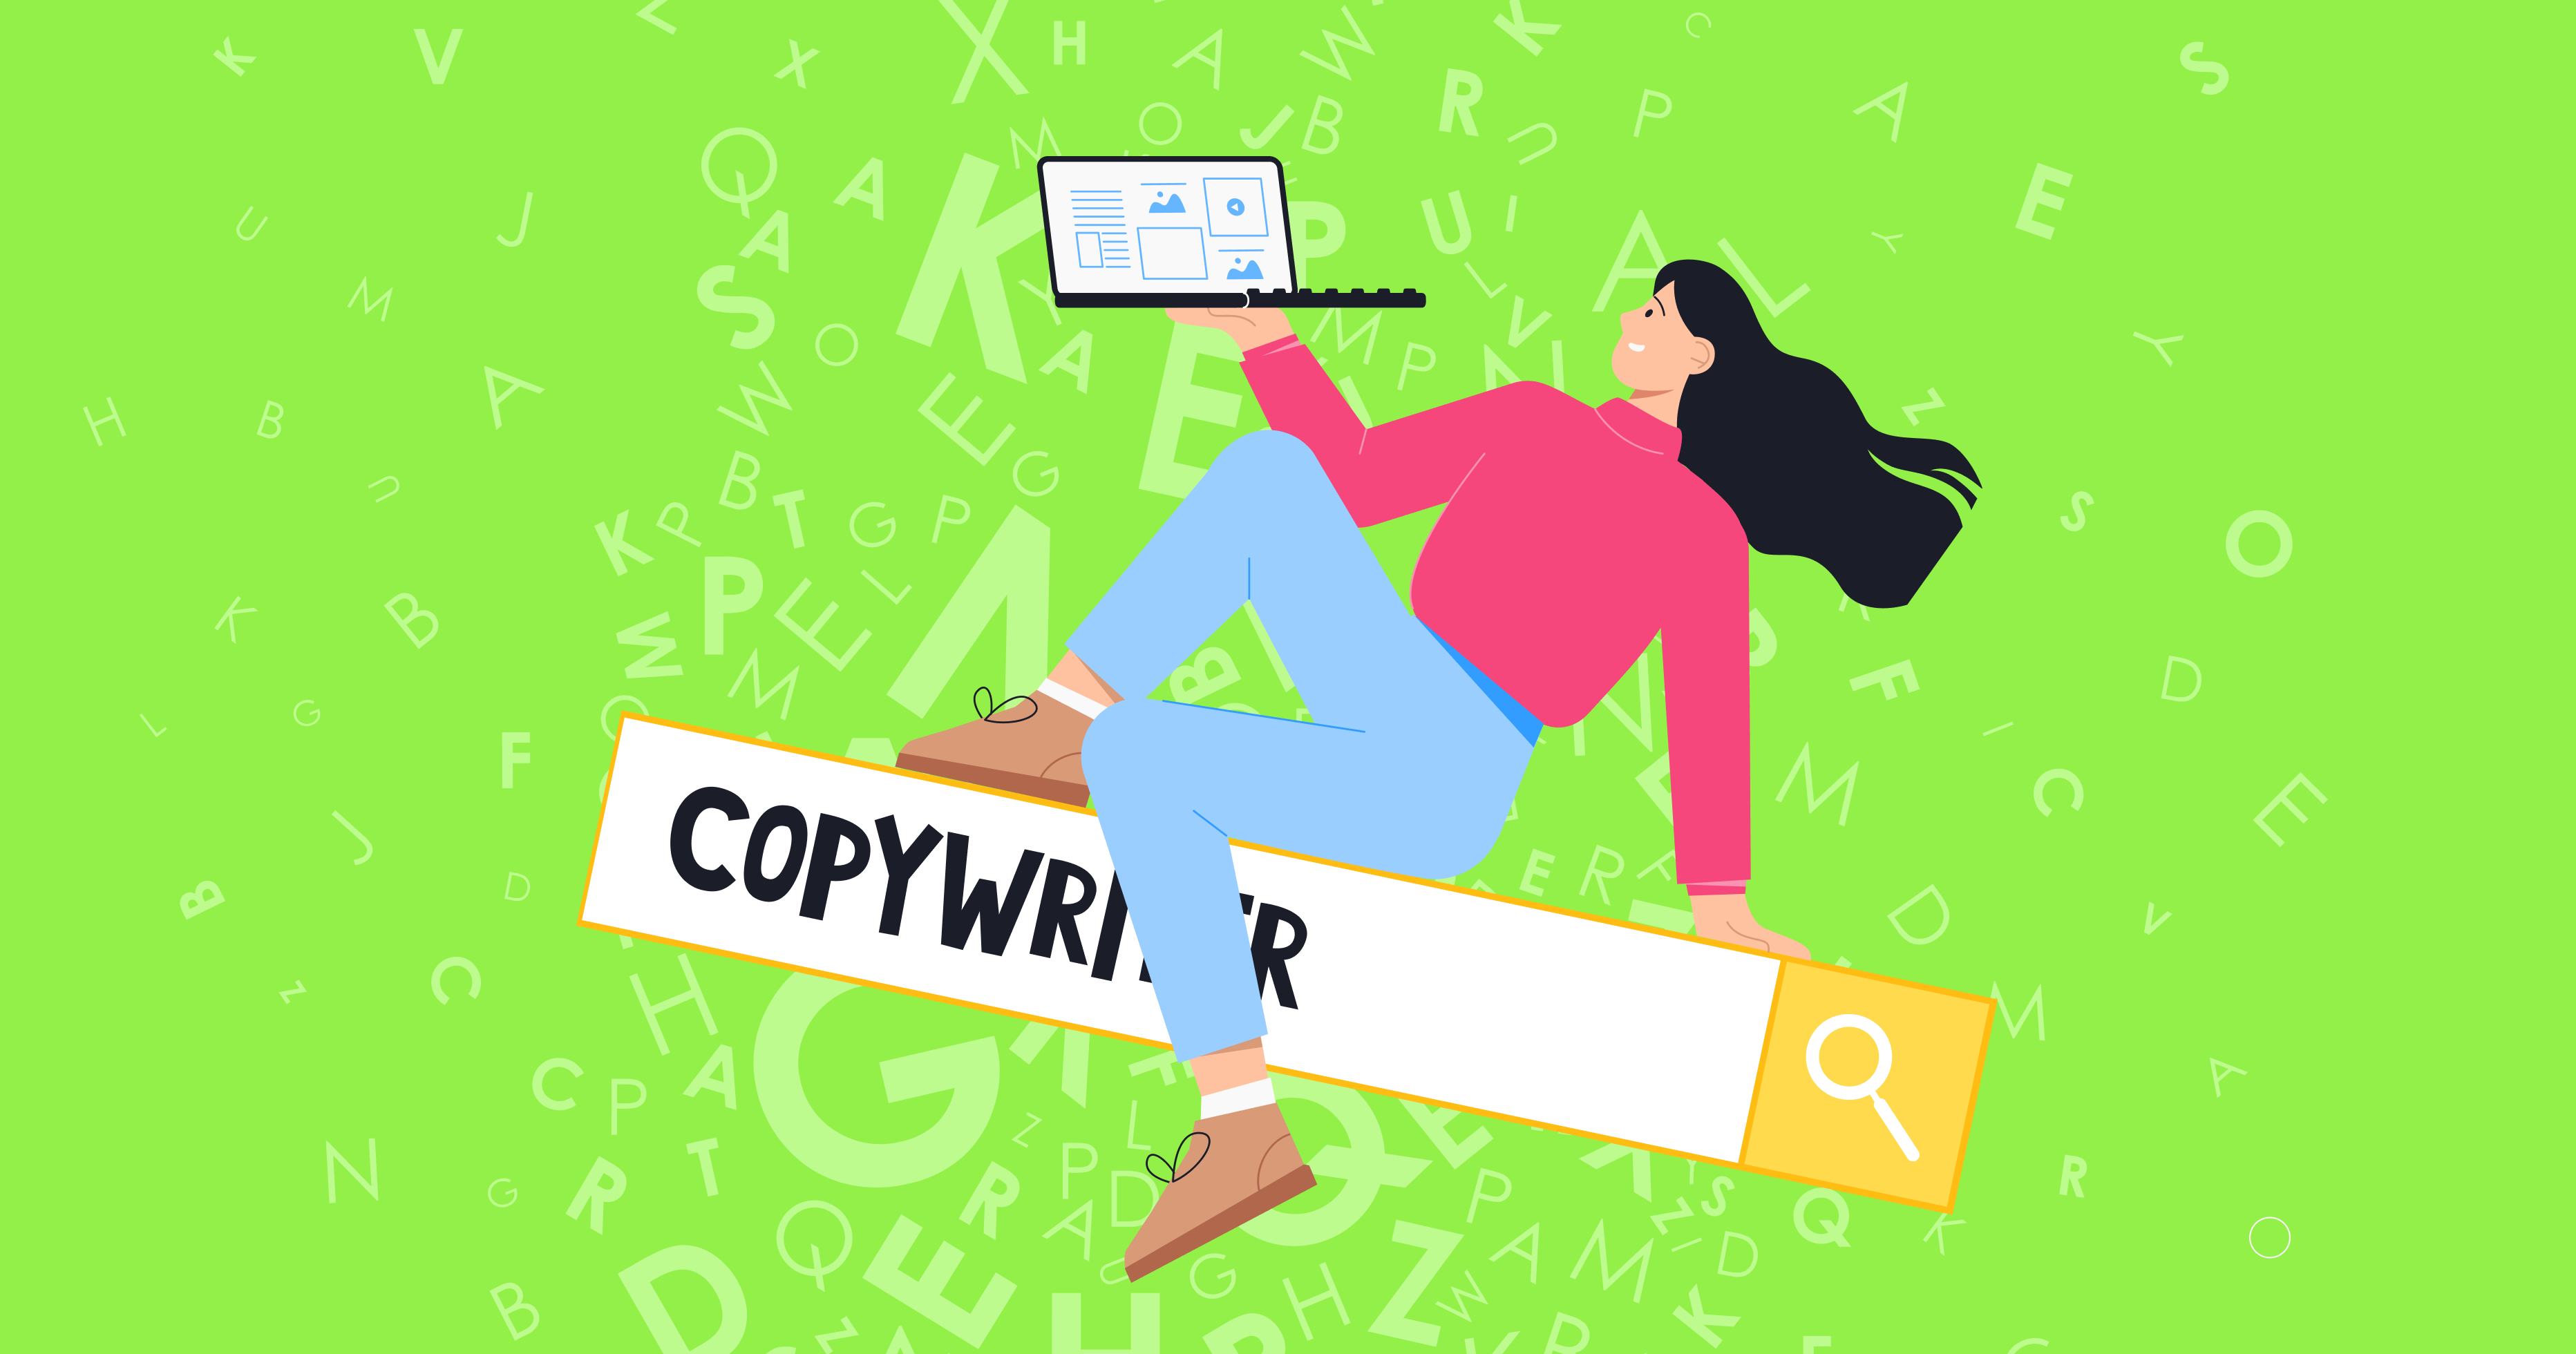 How to hire a copywriter for your blog